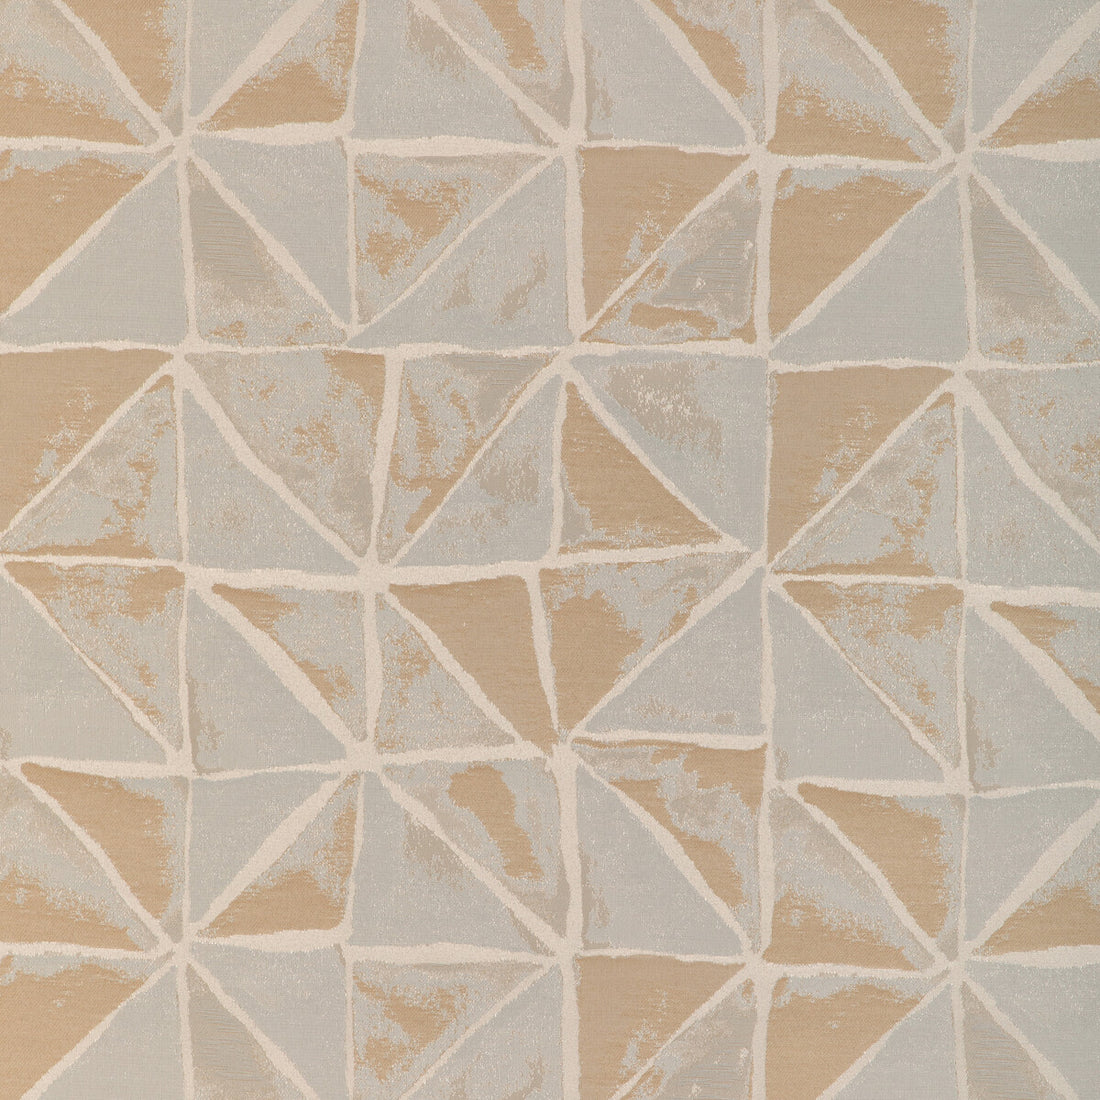 Looking Glass fabric in sandstone color - pattern 37076.411.0 - by Kravet Contract in the Chesapeake collection